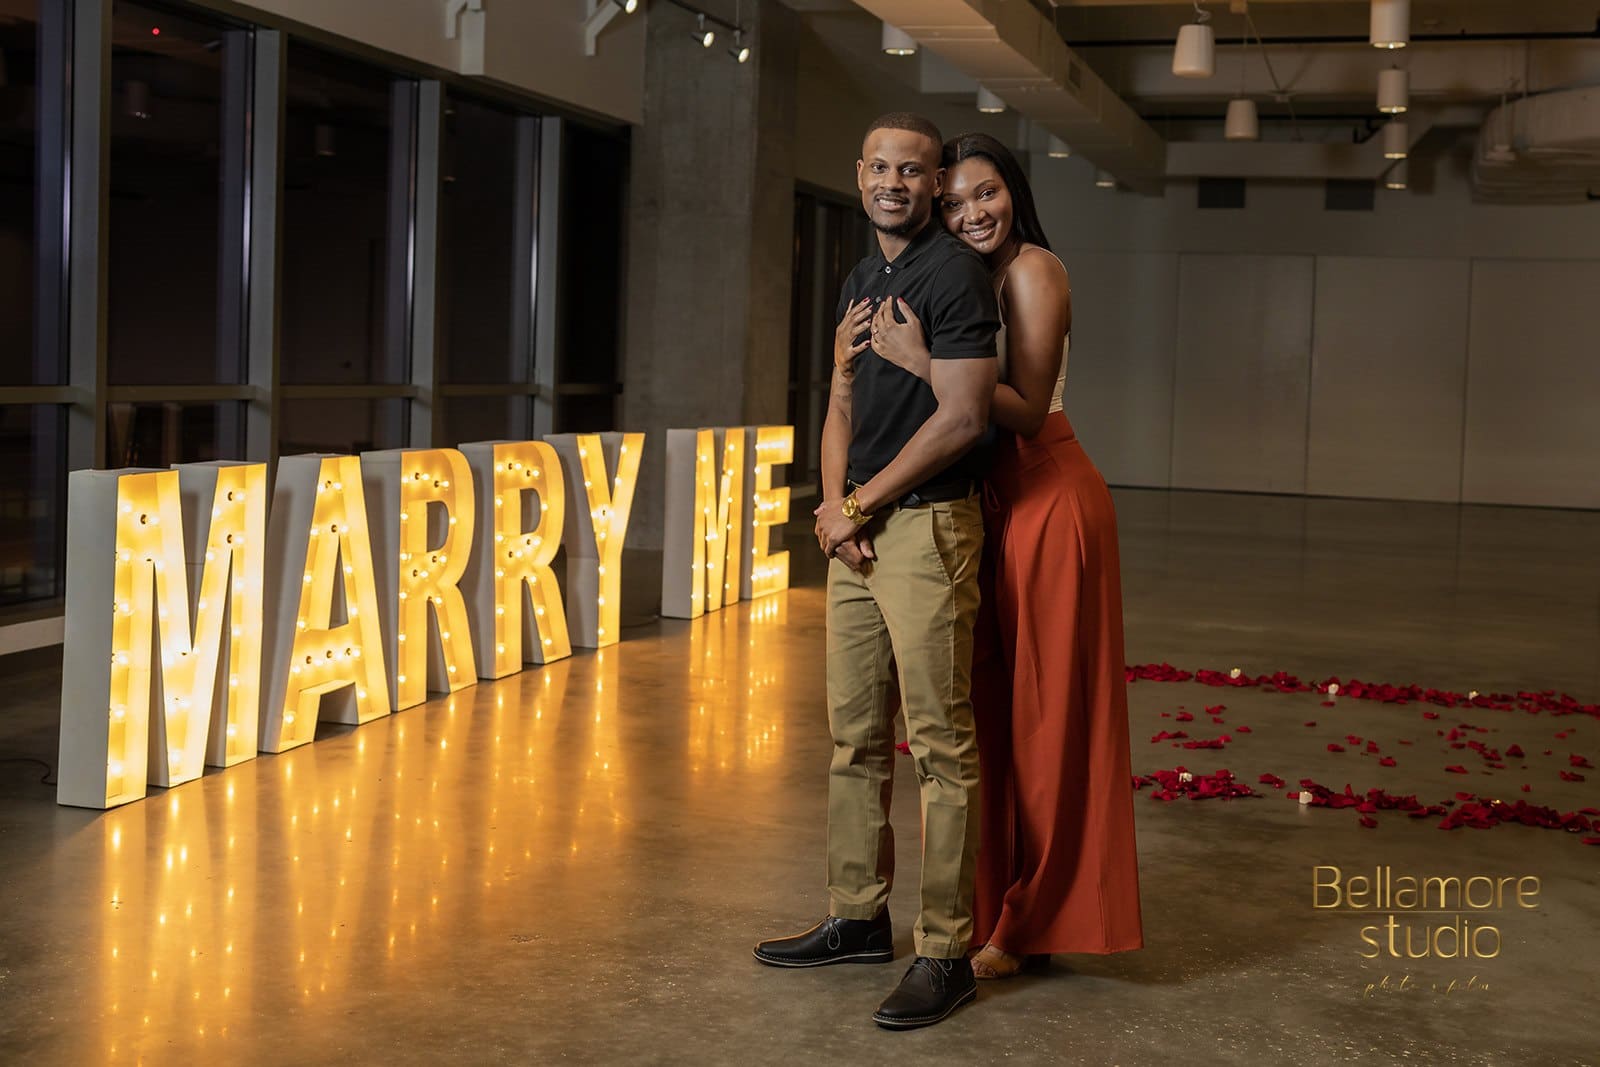 bride-to-be hugging the groom-to-be from behind in front of their marry me sign from the proposal.